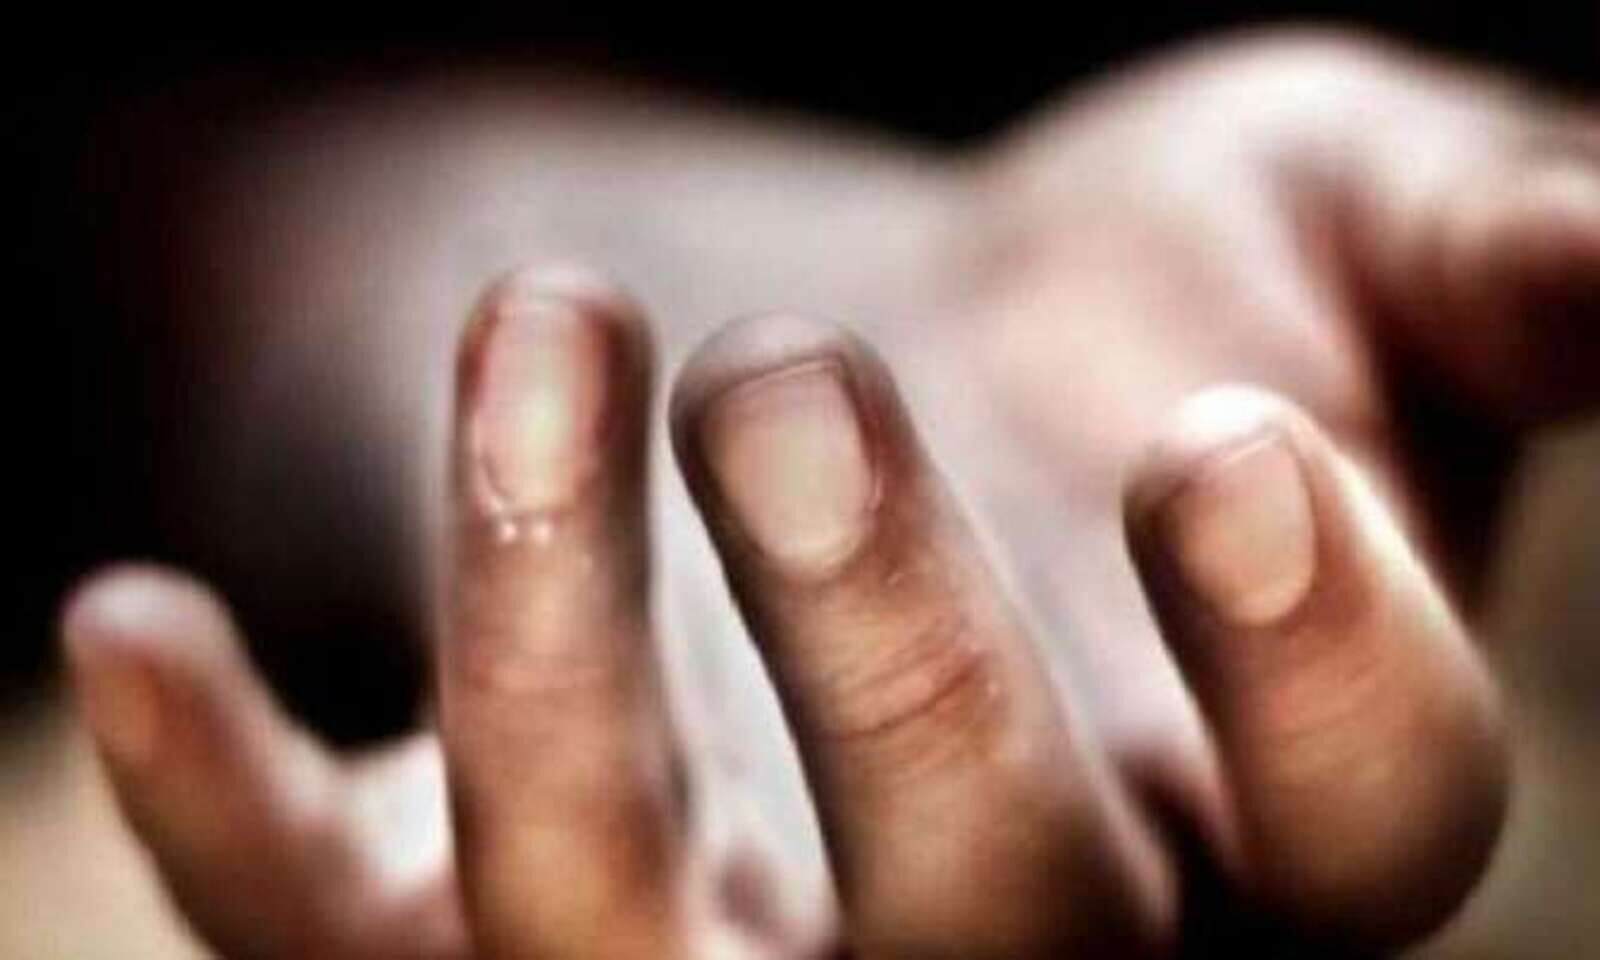 16-year-old girl stabbed over 20 times in horrific killing in crowded northwest Delhi neighbourhood